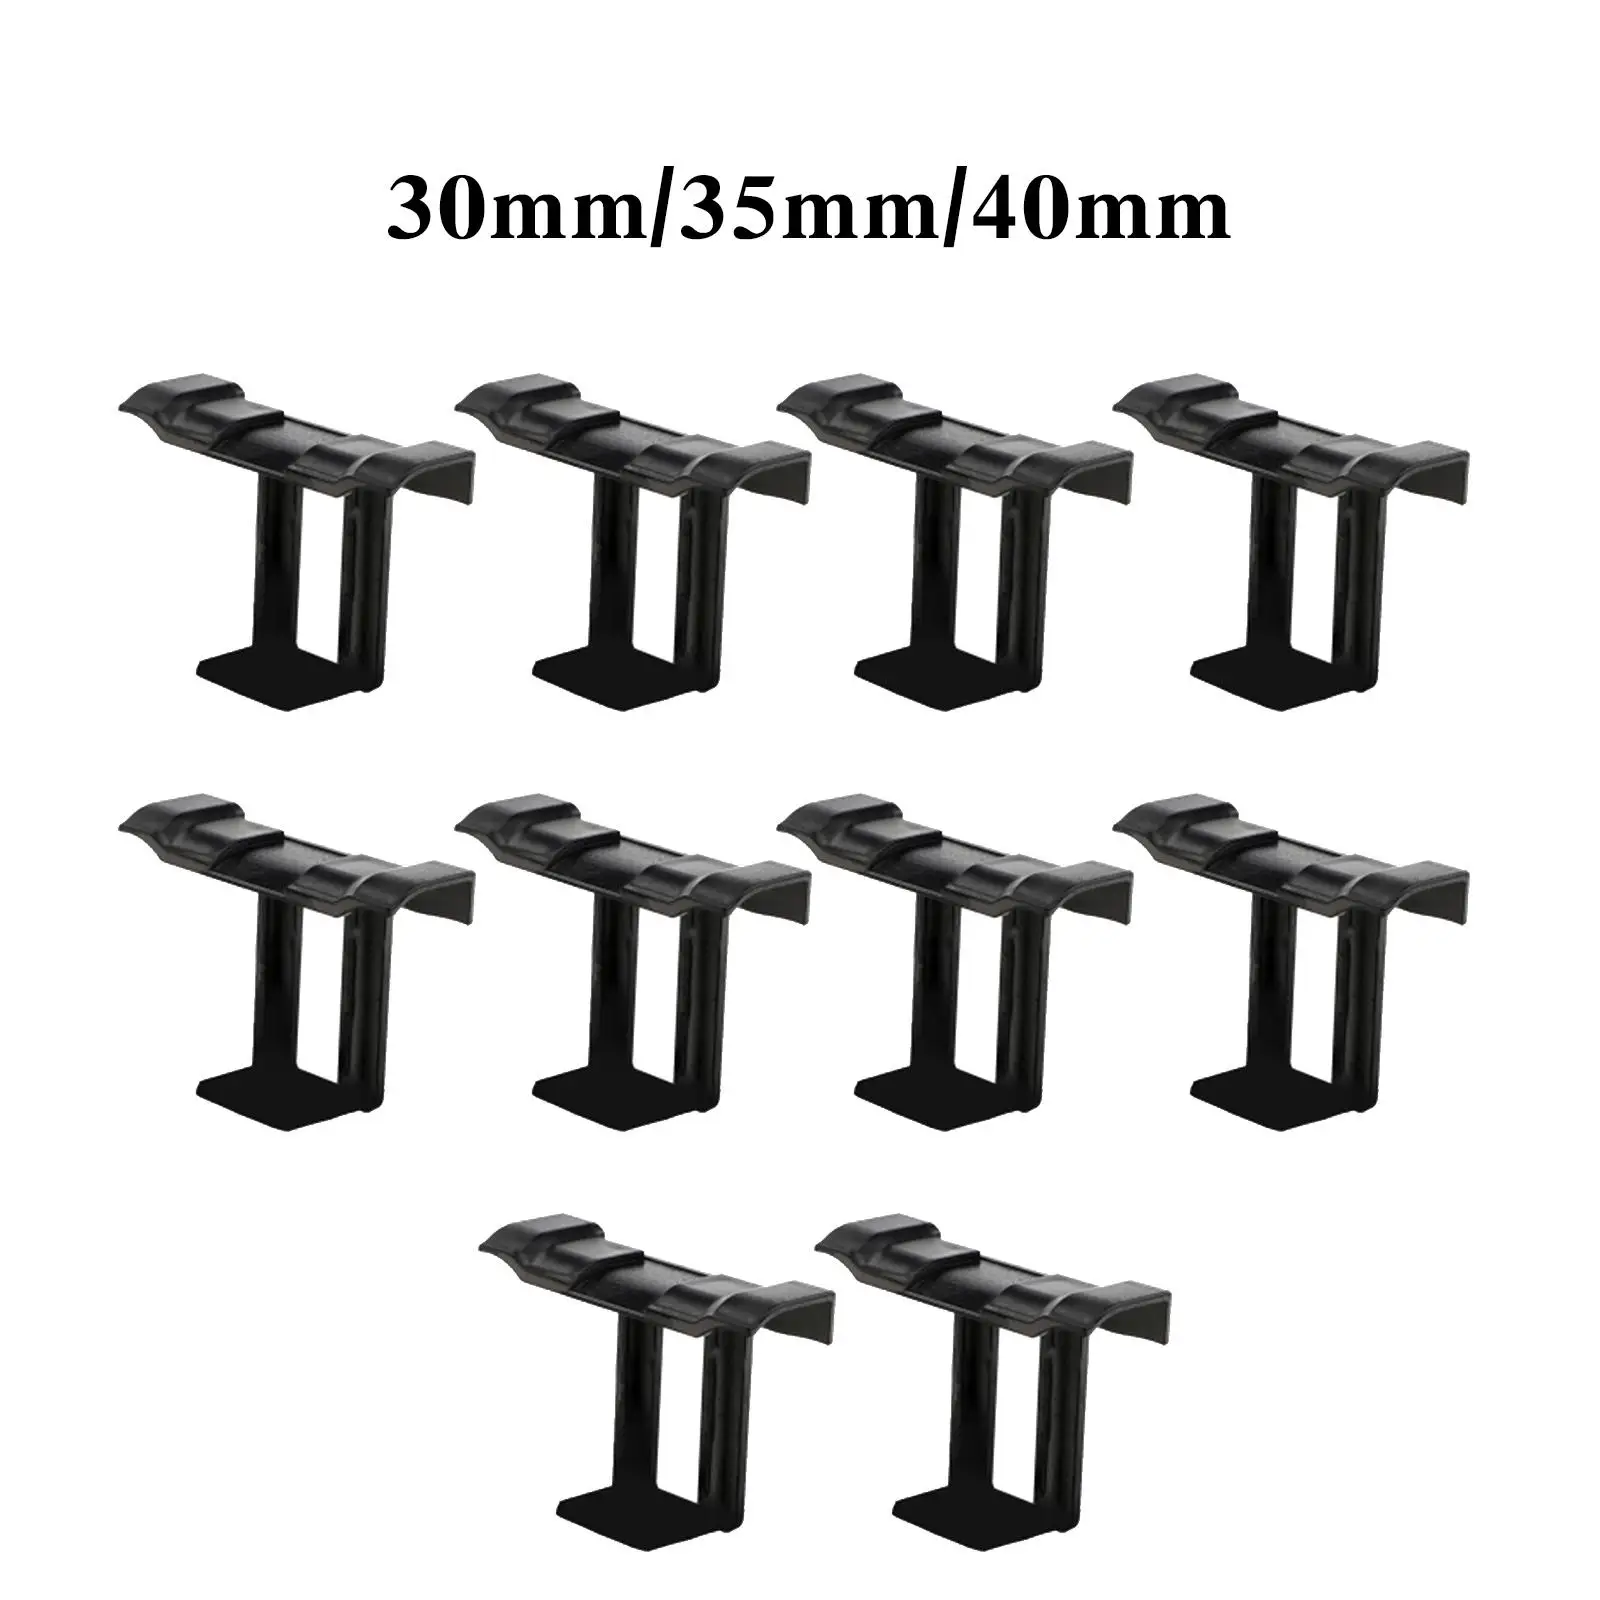 10x Solar Panel Water Drainage Clips Pv Modules Cleaning Clips Photovoltaic Clip